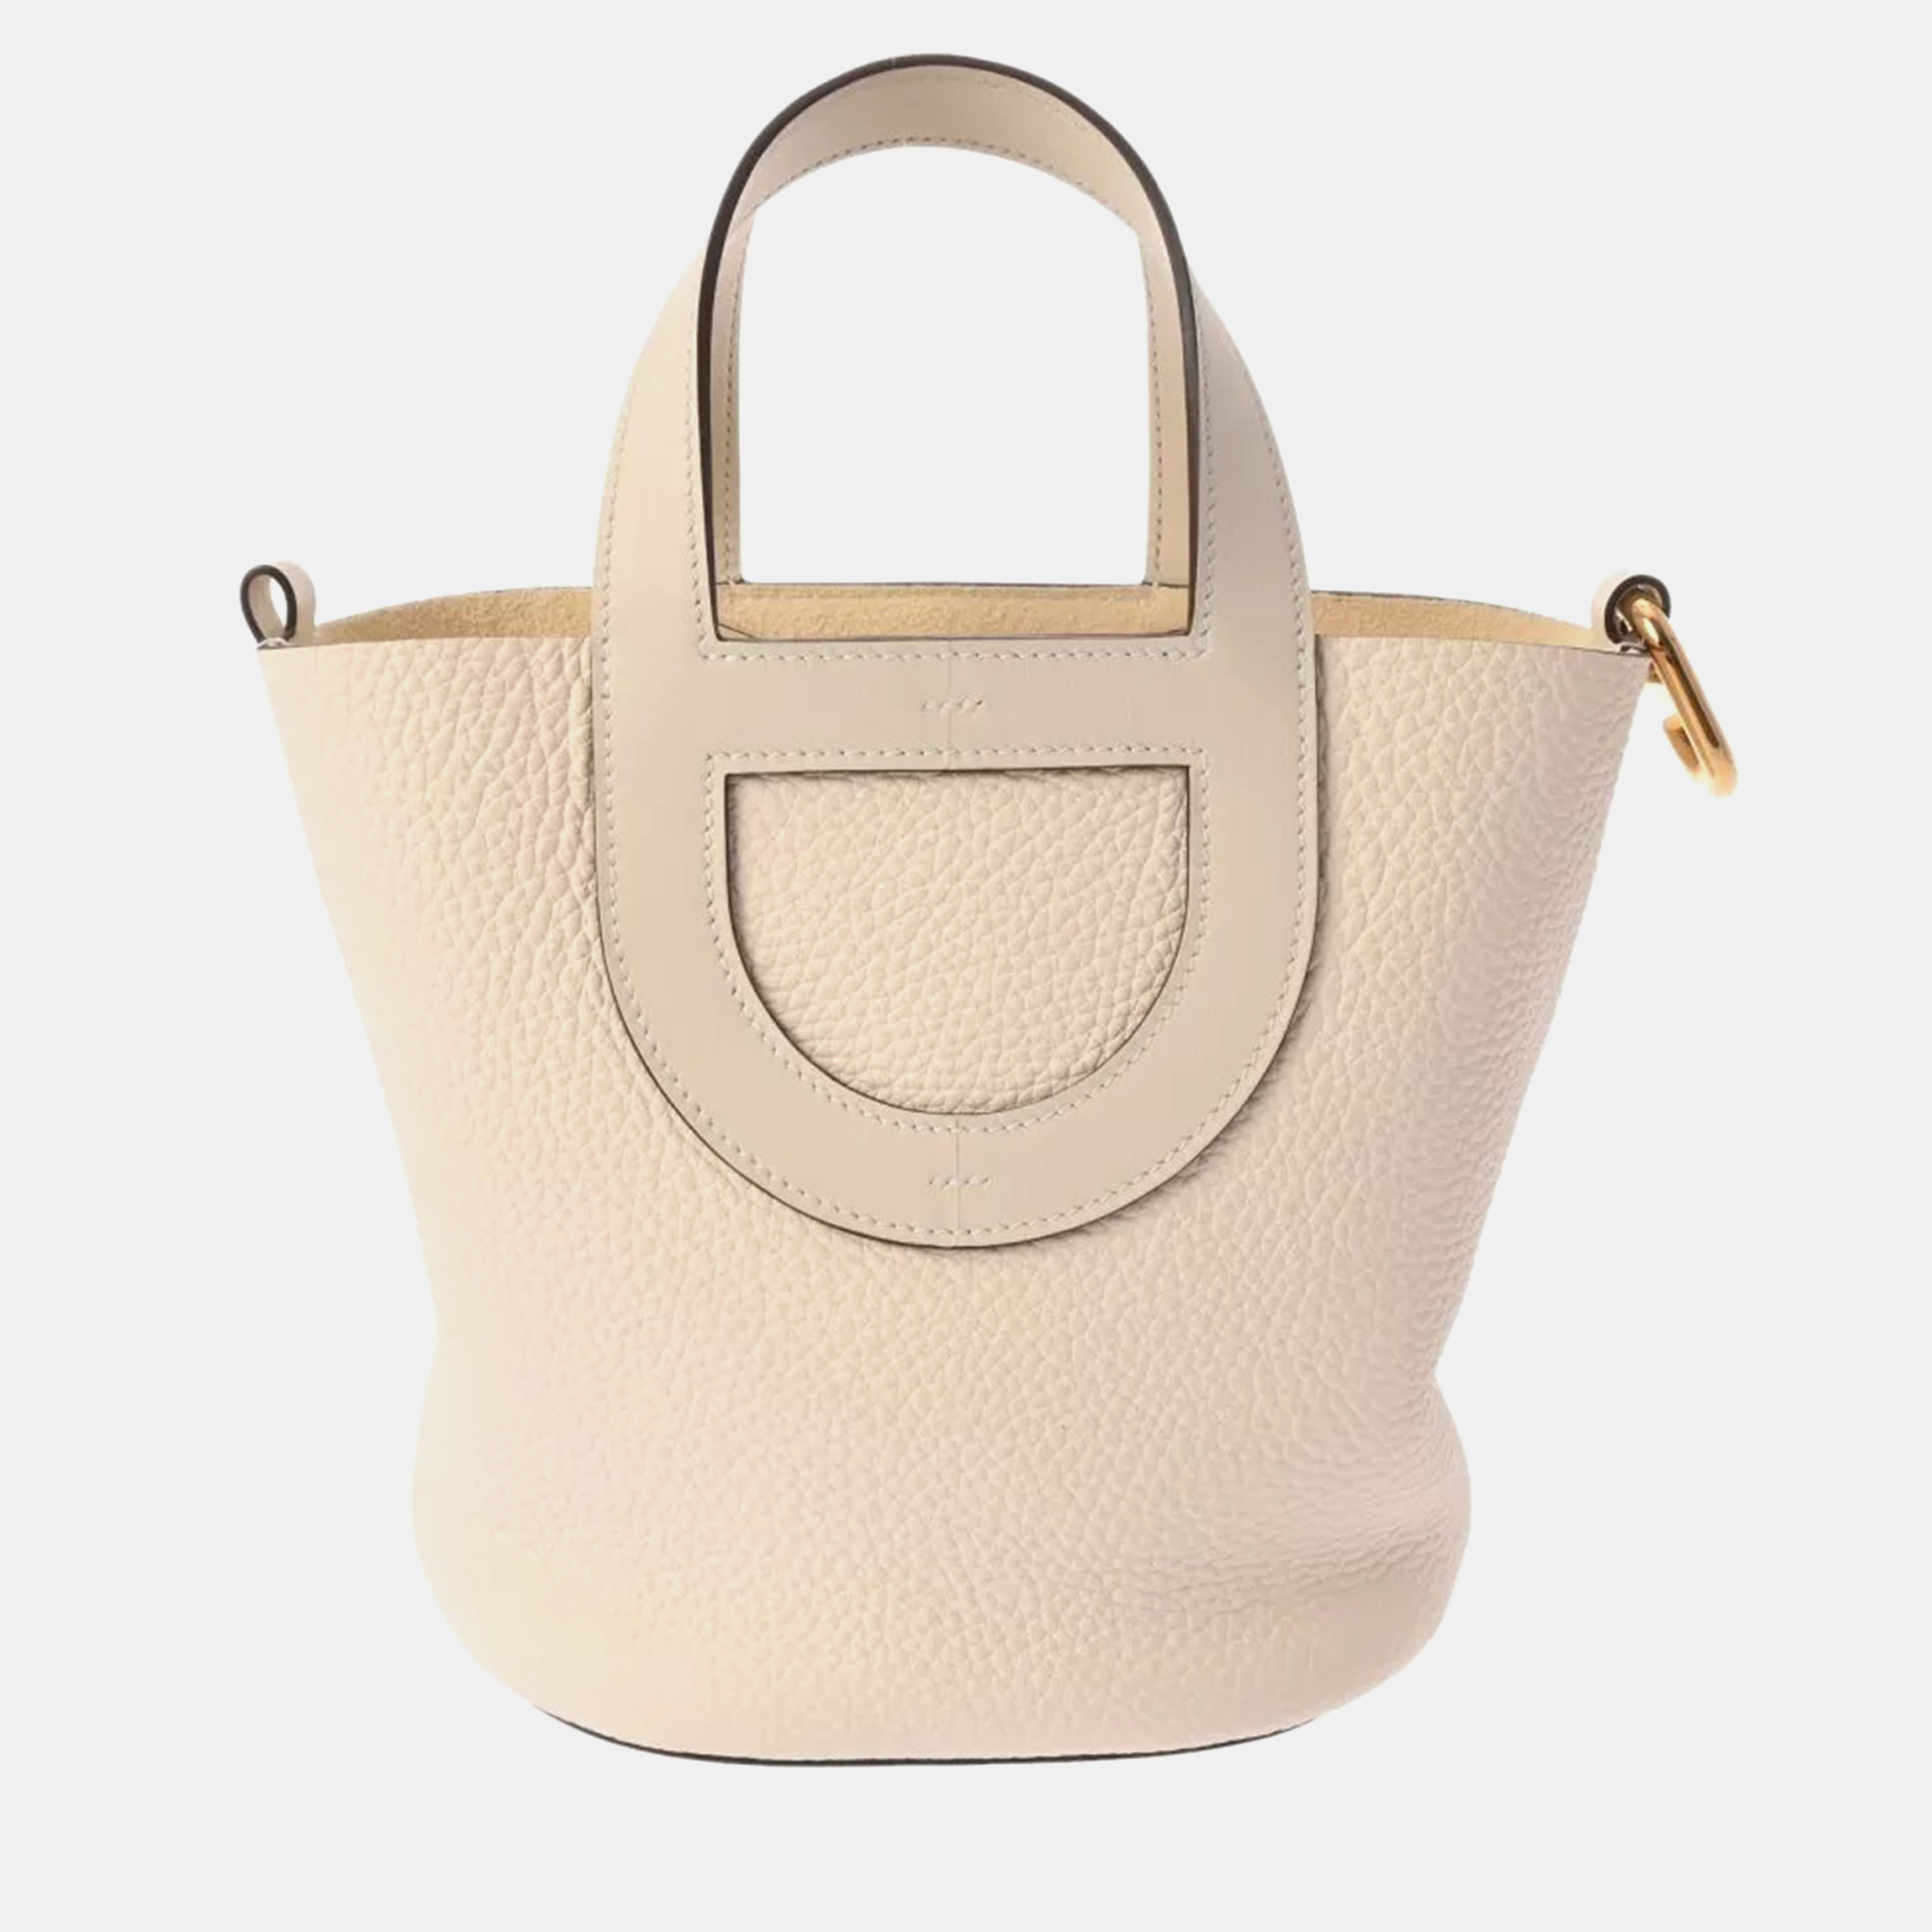 Hermes white clemence & swift leather in-the-loop 18 bag